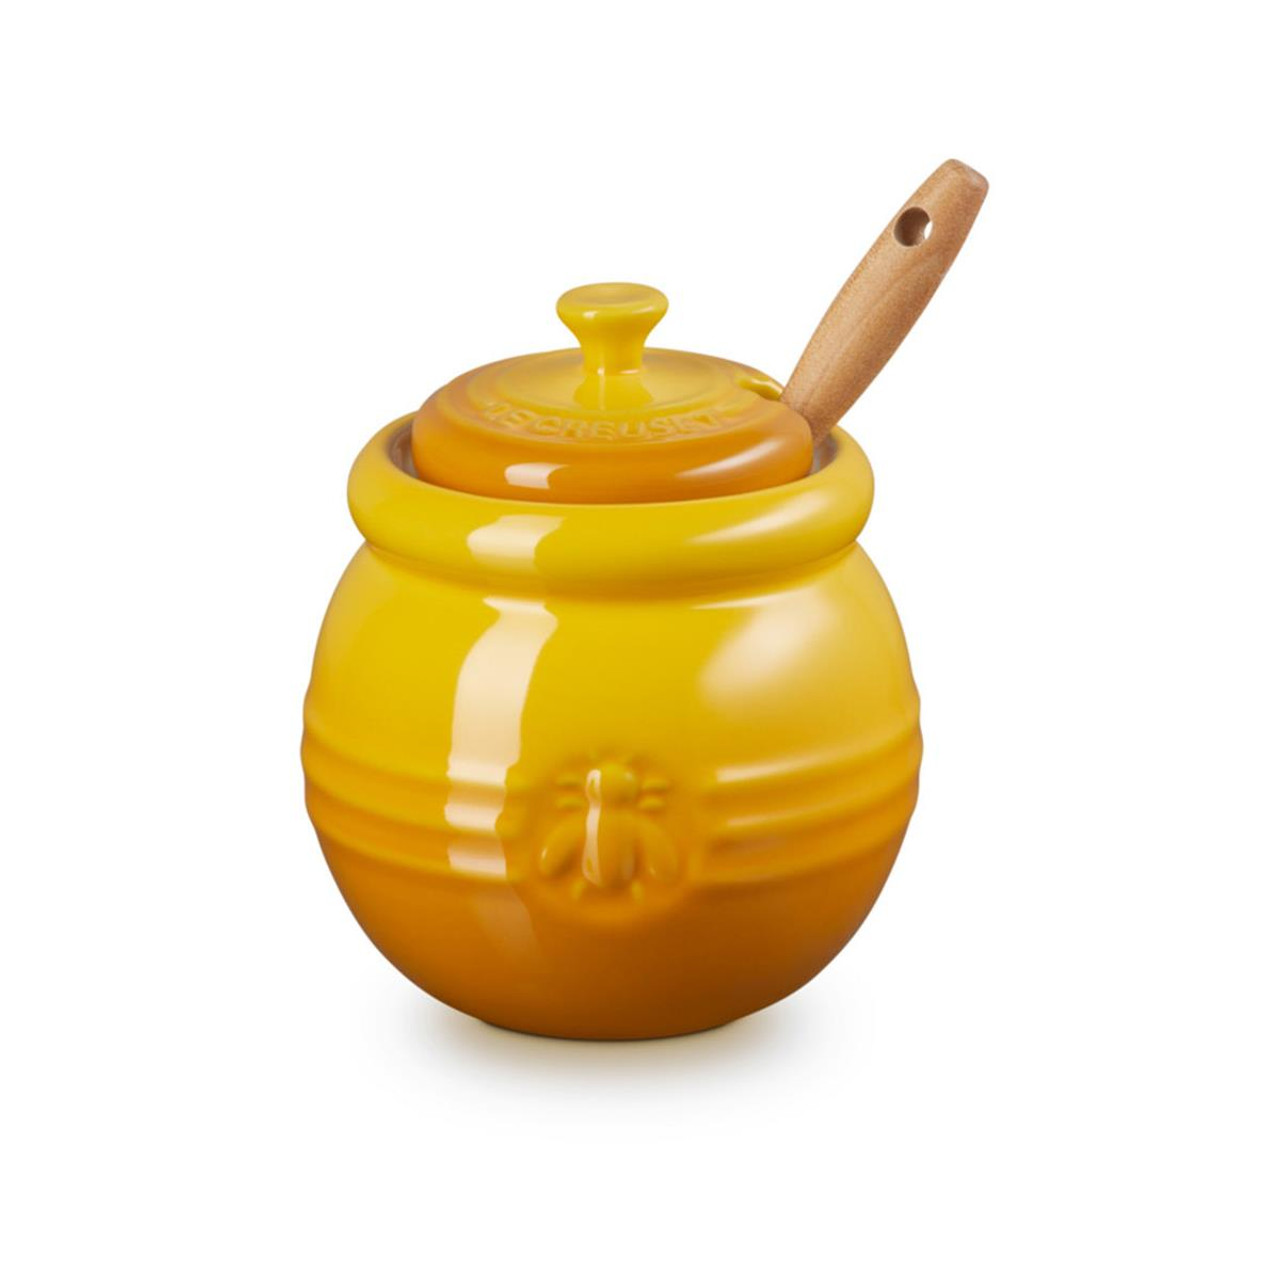 Does the lid of the Le Creuset honey pot prevent Hygroscopy?